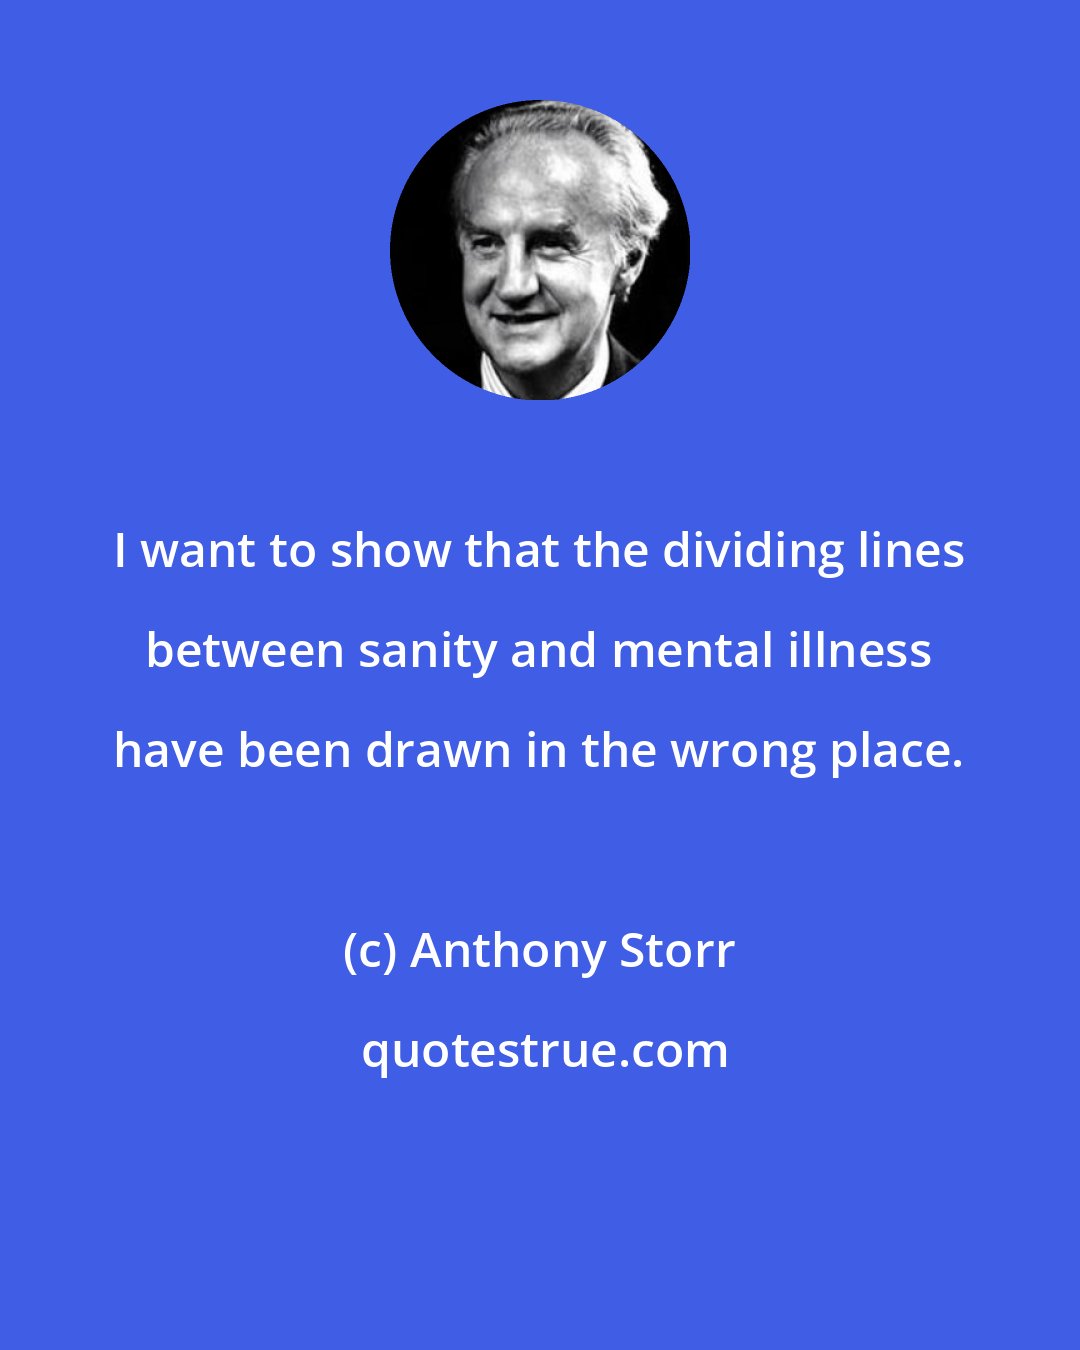 Anthony Storr: I want to show that the dividing lines between sanity and mental illness have been drawn in the wrong place.